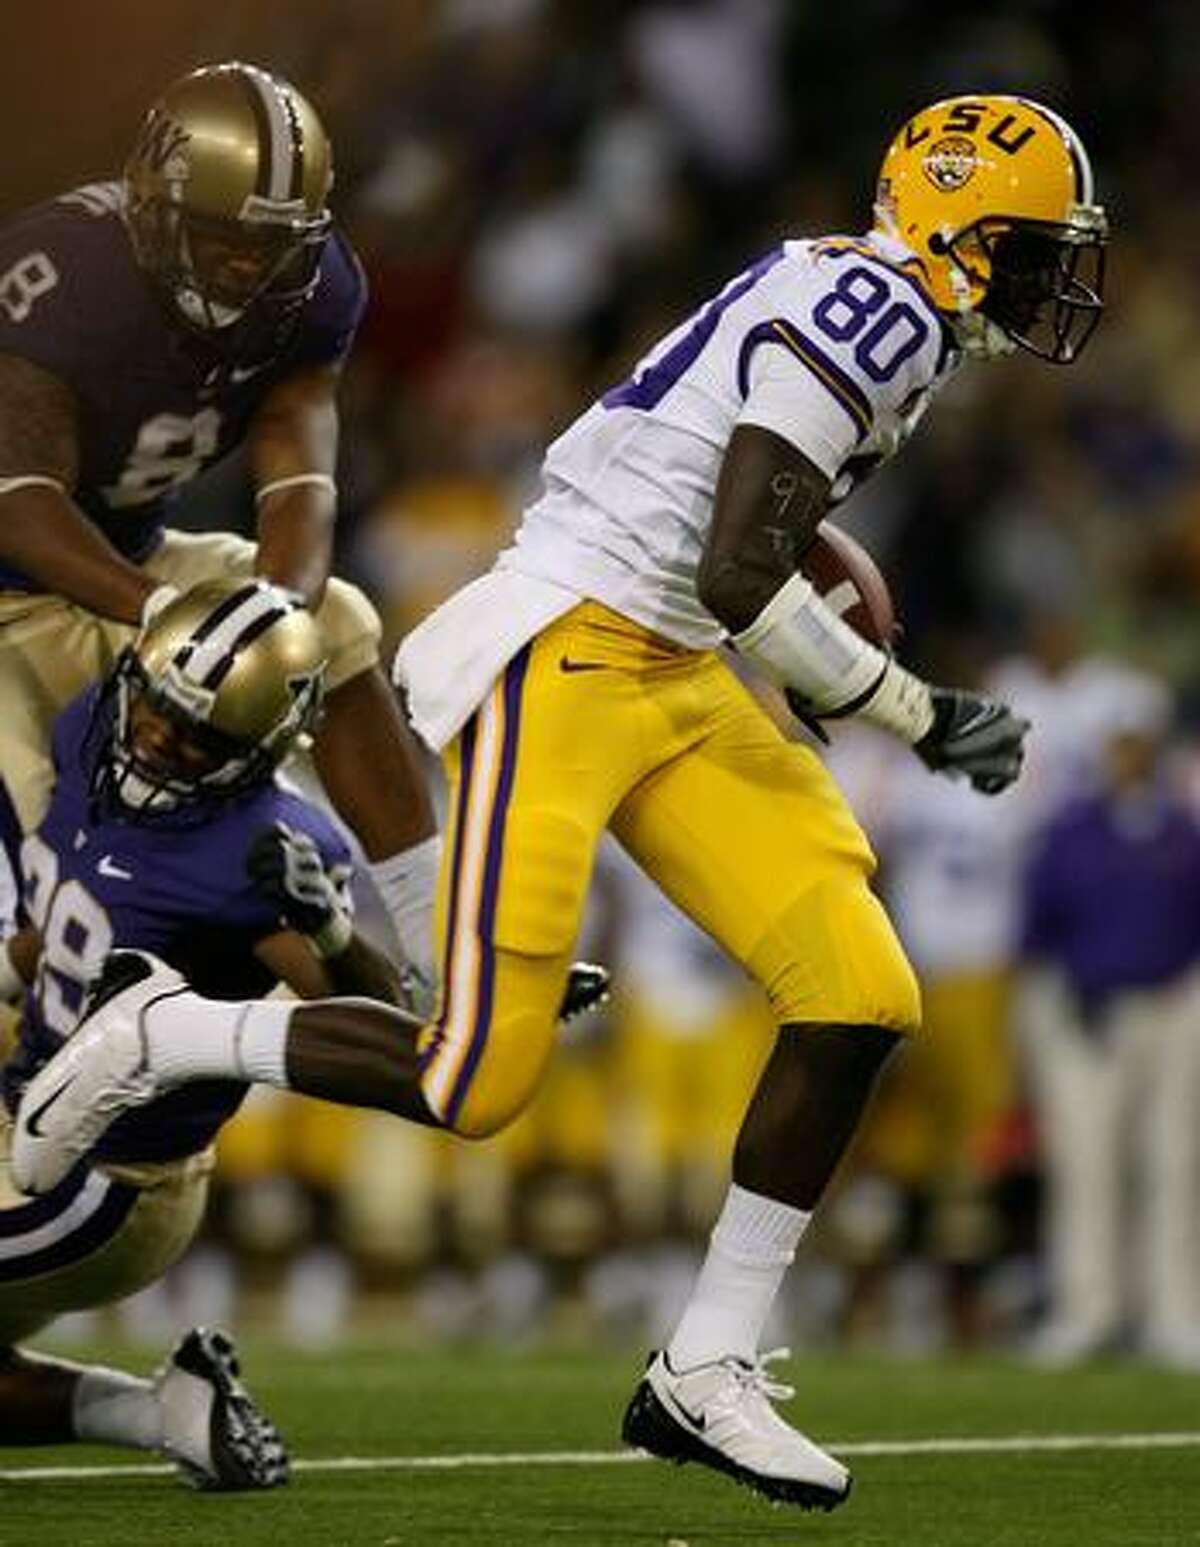 SEATTLE - SEPTEMBER 05: Wide receiver Terrance Toliver #80 of the LSU Tigers moves the ball after making a catch on a 49 yard touchdown play against the Washington Huskies on September 5, 2009 at Husky Stadium in Seattle, Washington.